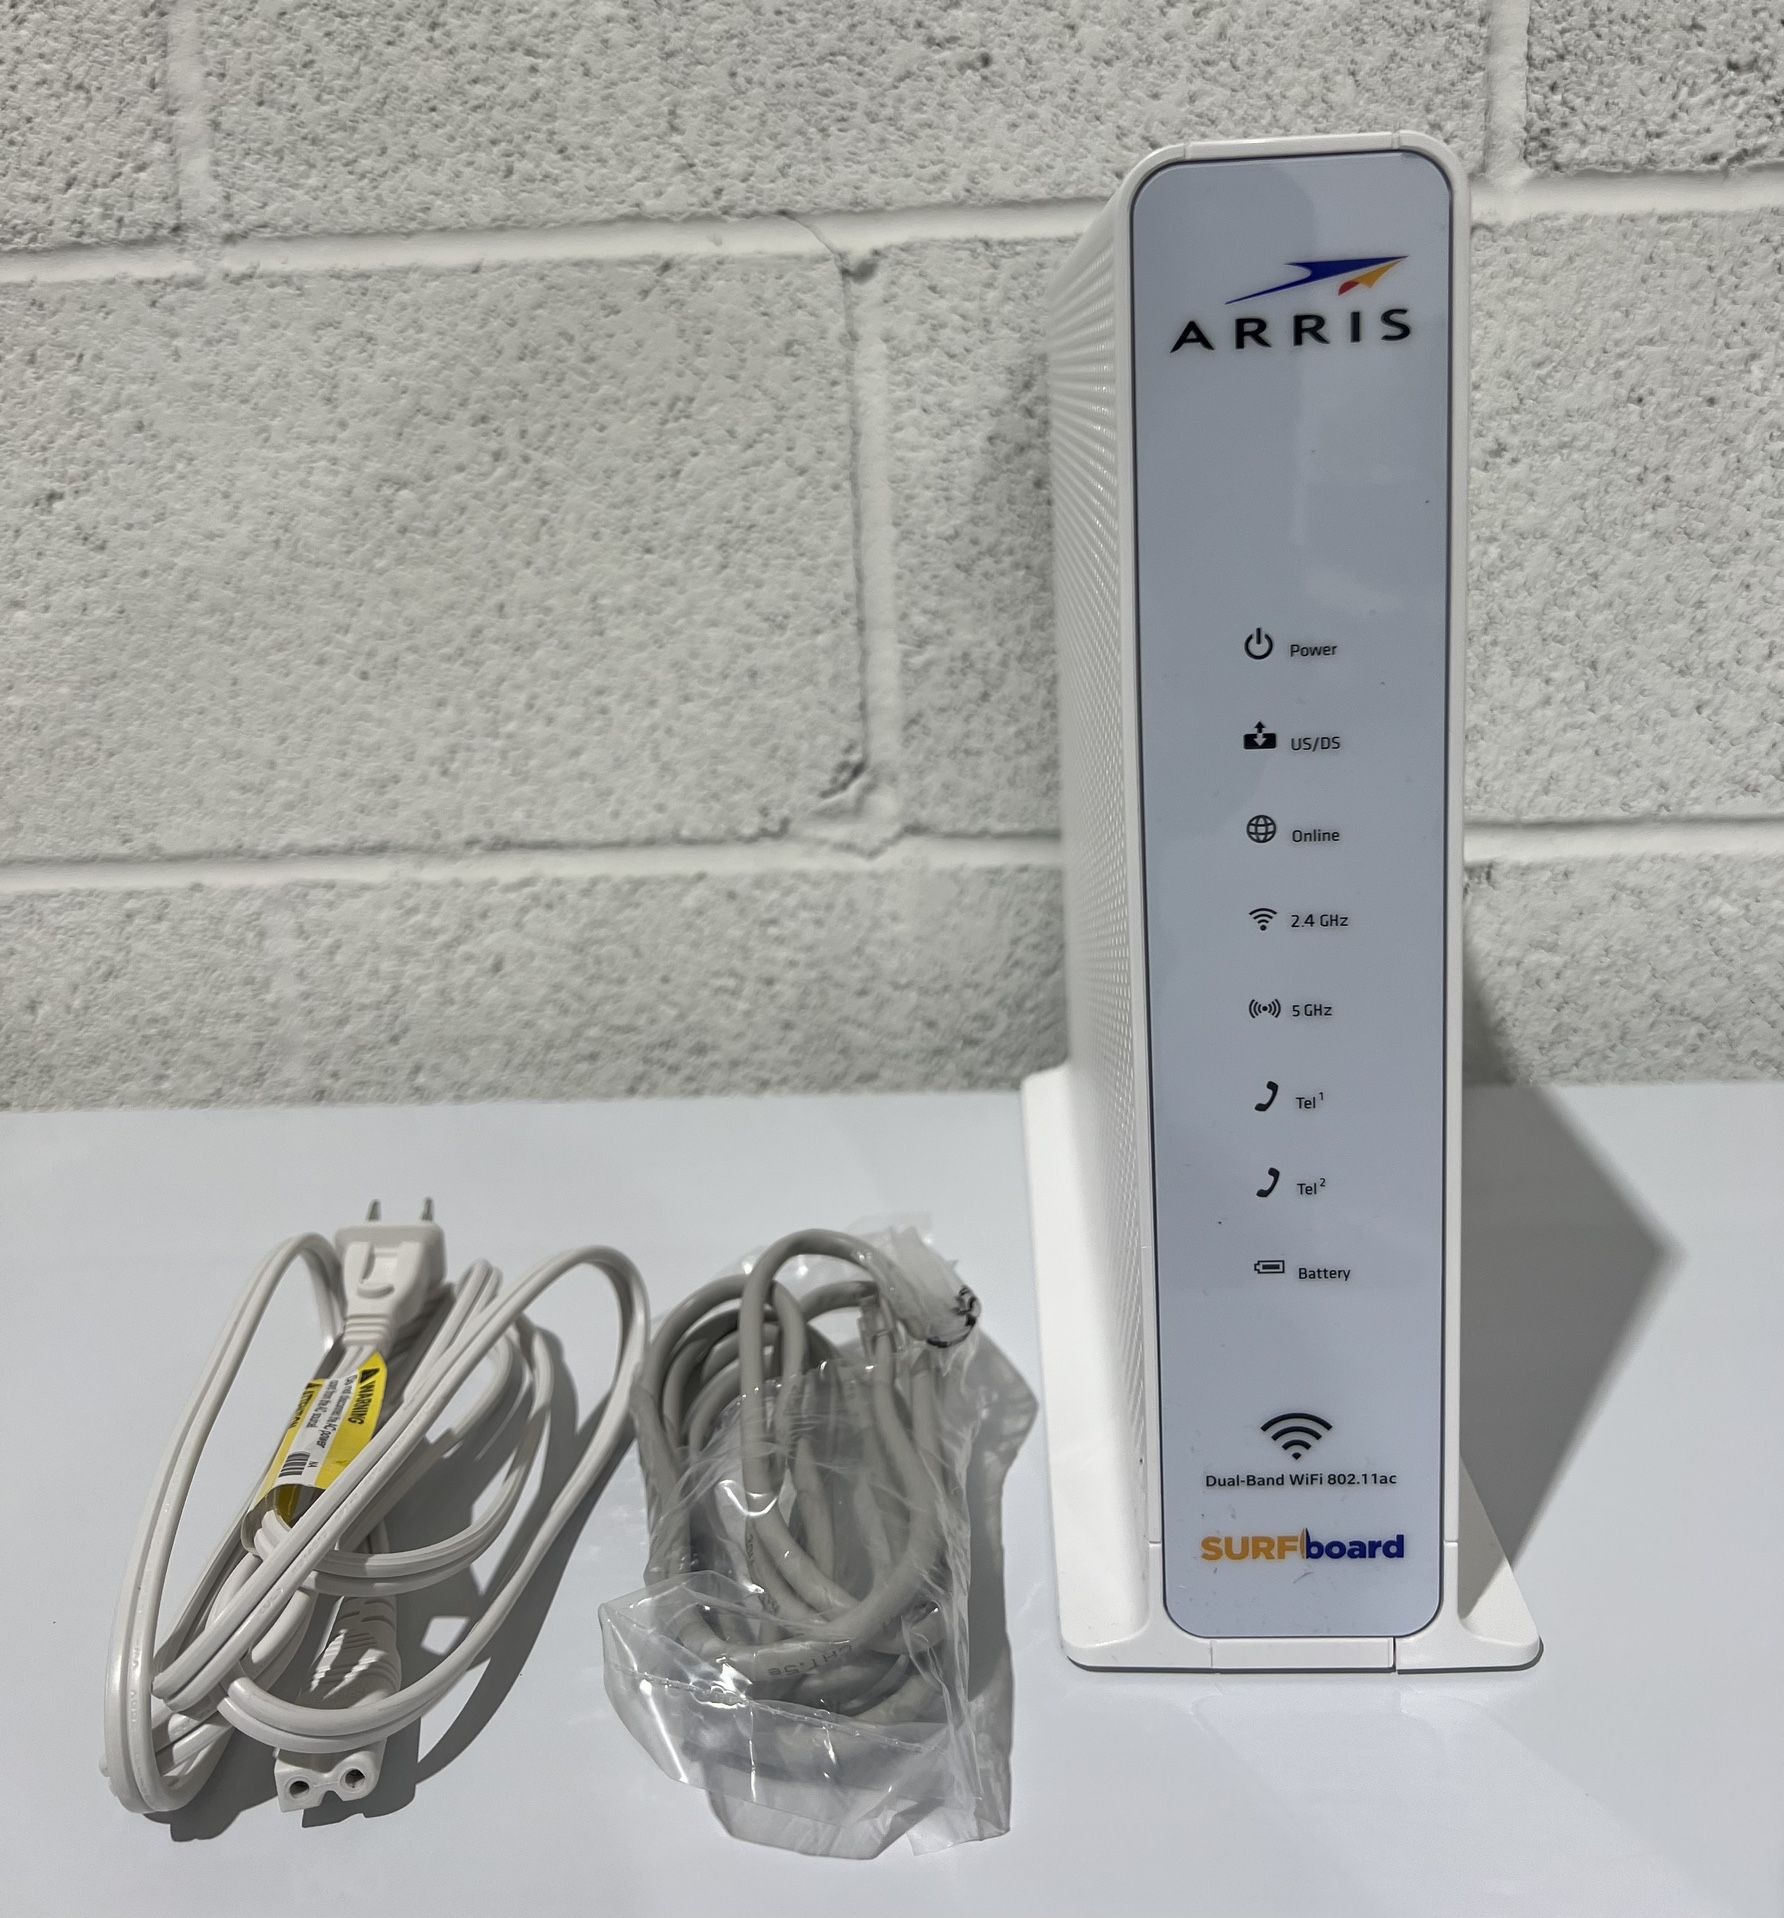 ARRIS Surfboard (24x8) DOCSIS 3.0 Cable Modem / AC1750 Dual-Band Router / Xfinity Voice. Approved for Xfinity Comcast Only for Plans up to 600 Mbps